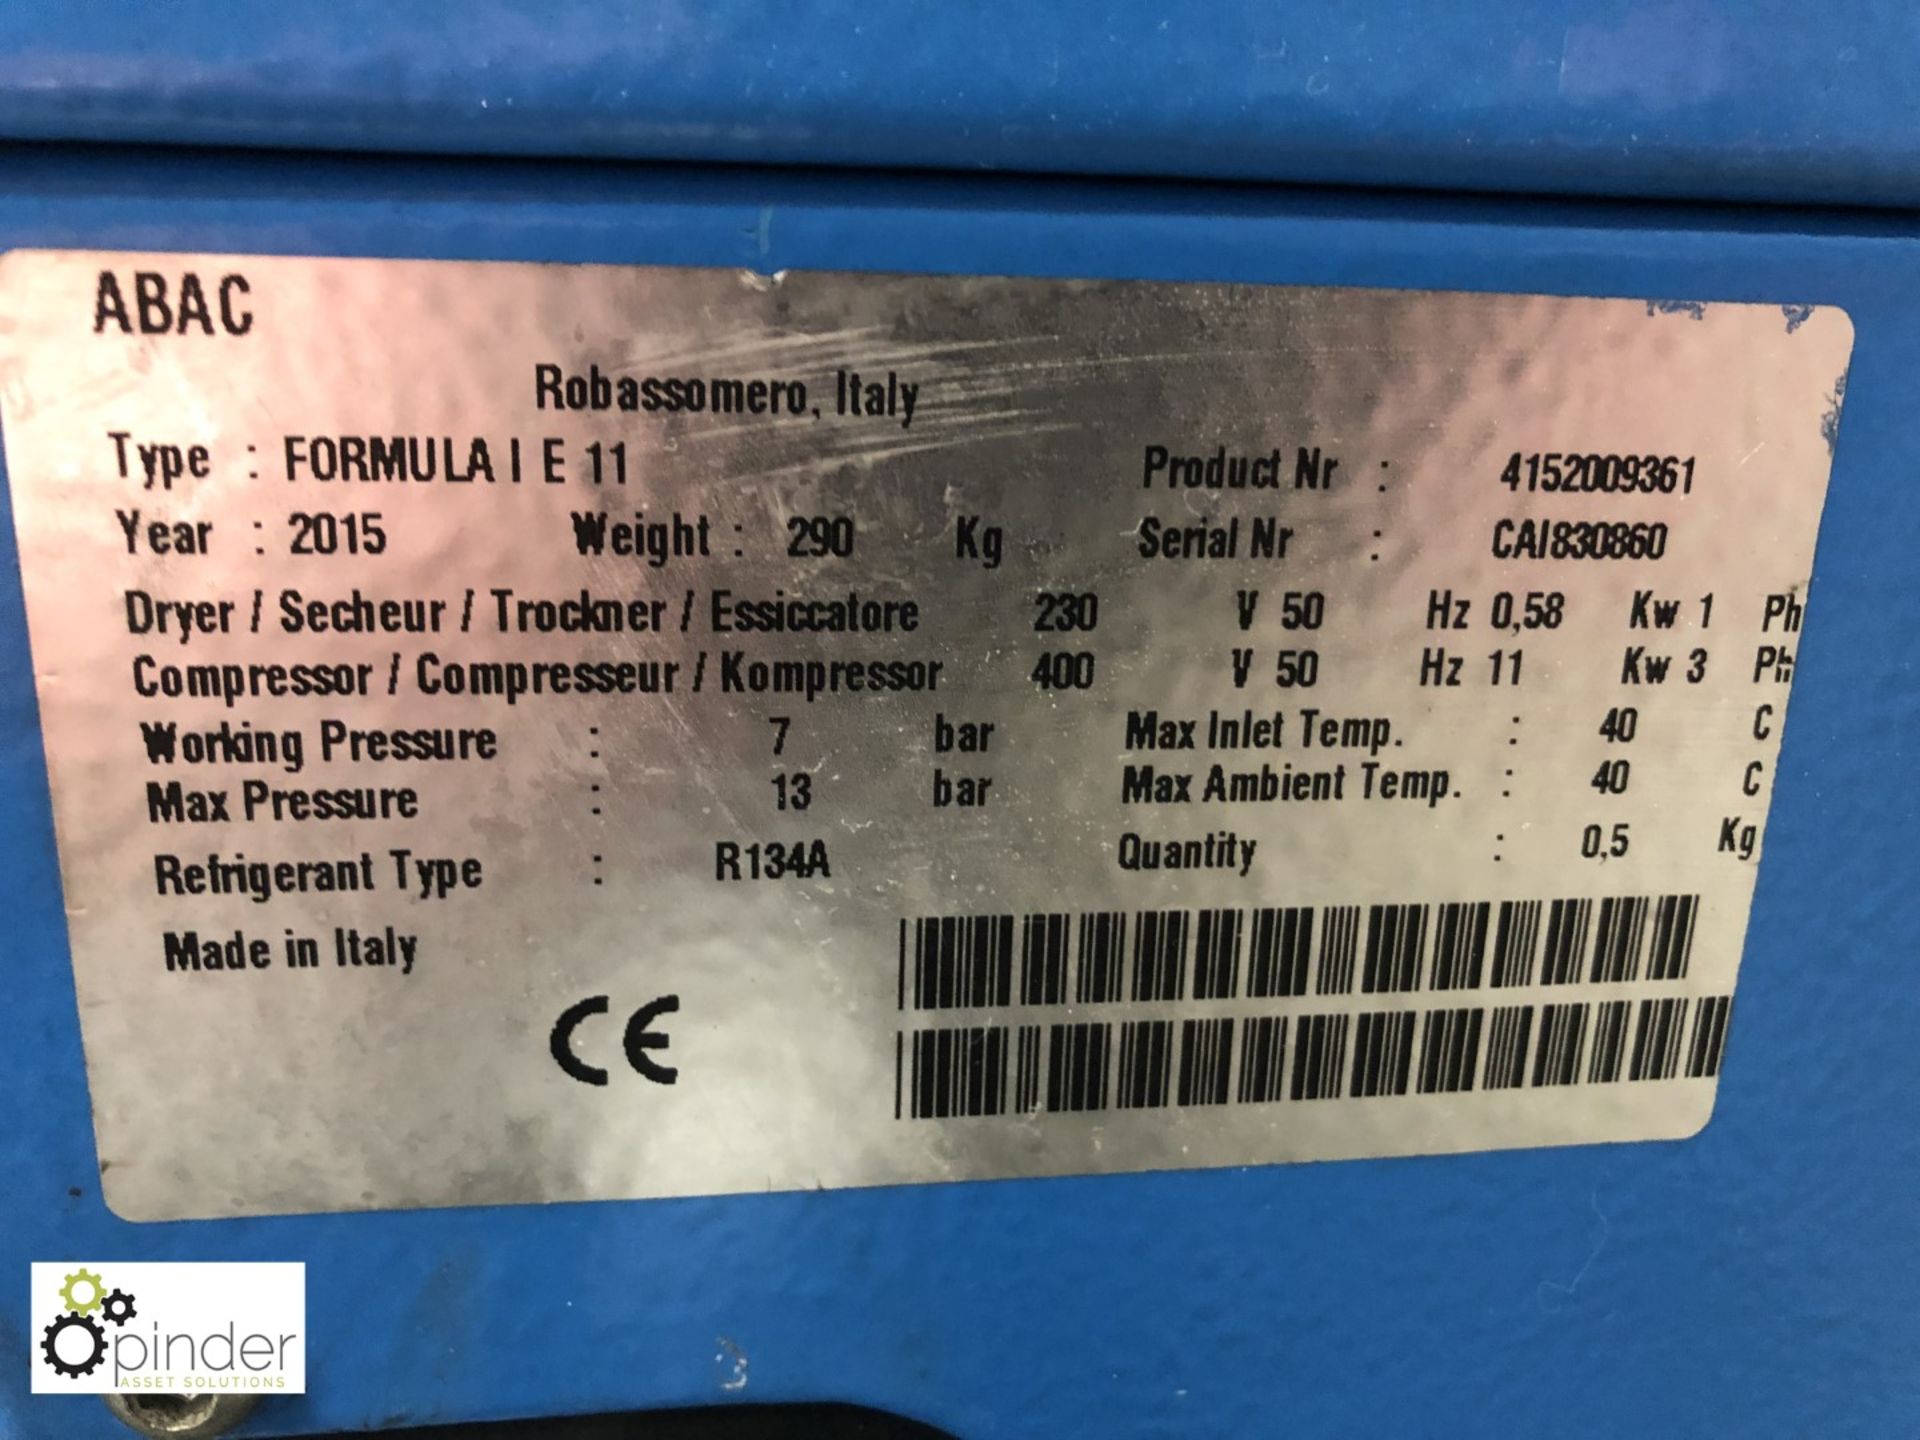 Abac Formula IE11 Packaged Compressor, 7bar working pressure, year 2015, serial number CAI830860, - Image 2 of 4